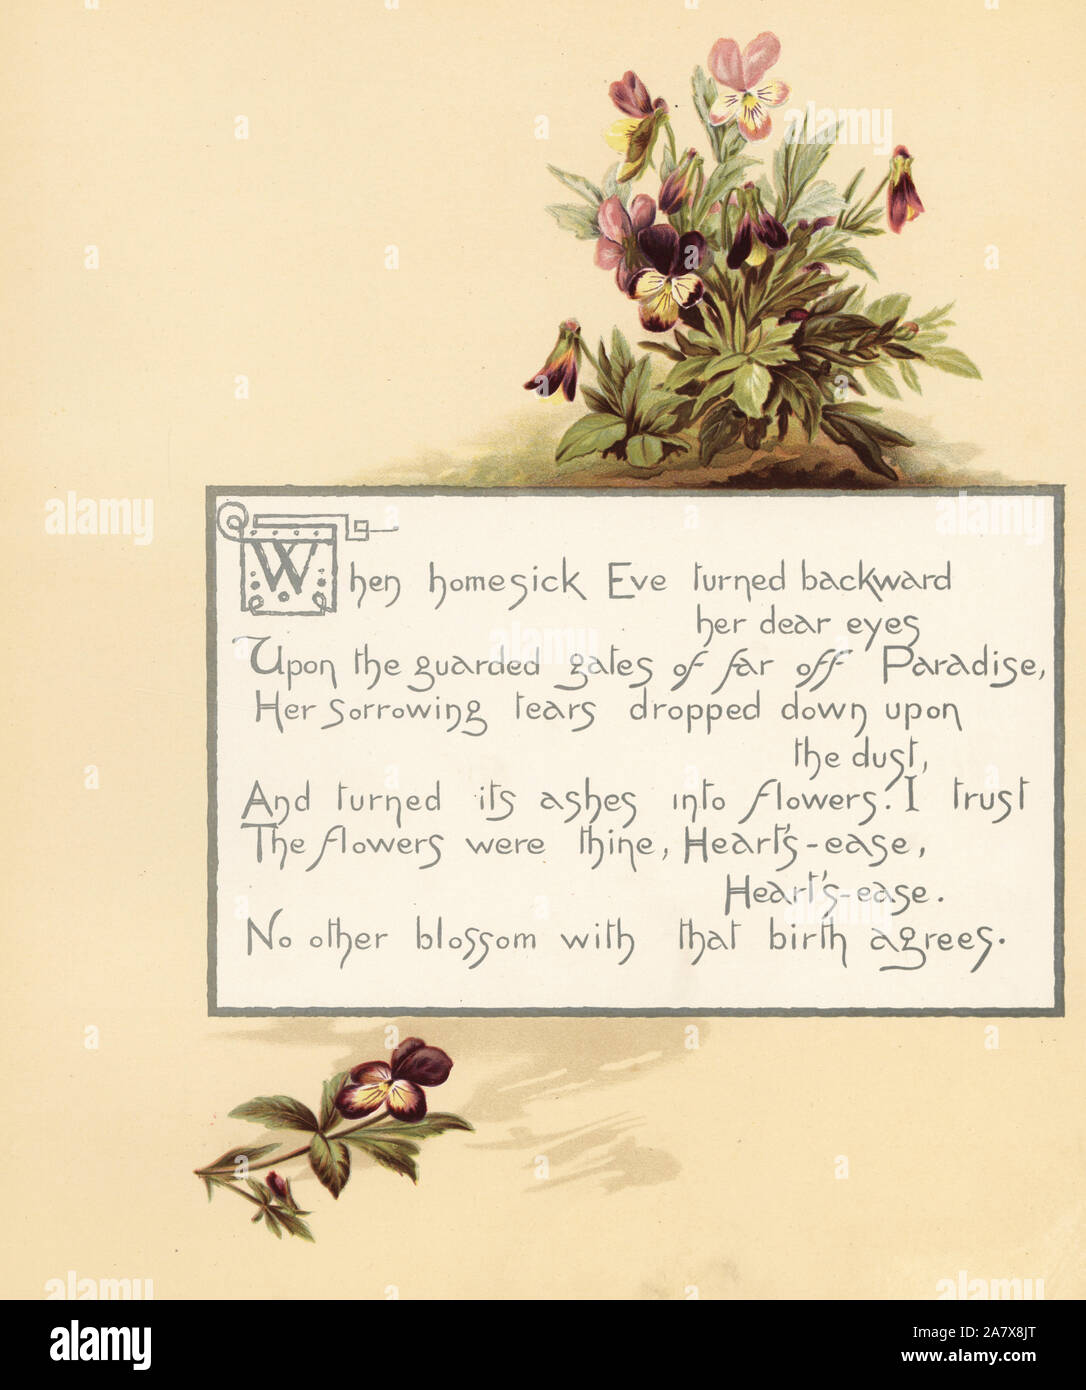 Heartsease, Viola tricolor, with calligraphic poem in box. Chromolithograph by Louis Prang  from Alice Ward Bailey's Flower Fancies, Boston, 1889. Illustrated by Lucy Baily, Eleanor Ecob Morse, Olive Whitney, Ellen Fisher, Fidelia Bridges, C. Ryan and F. Schuyler Mathews. Stock Photo